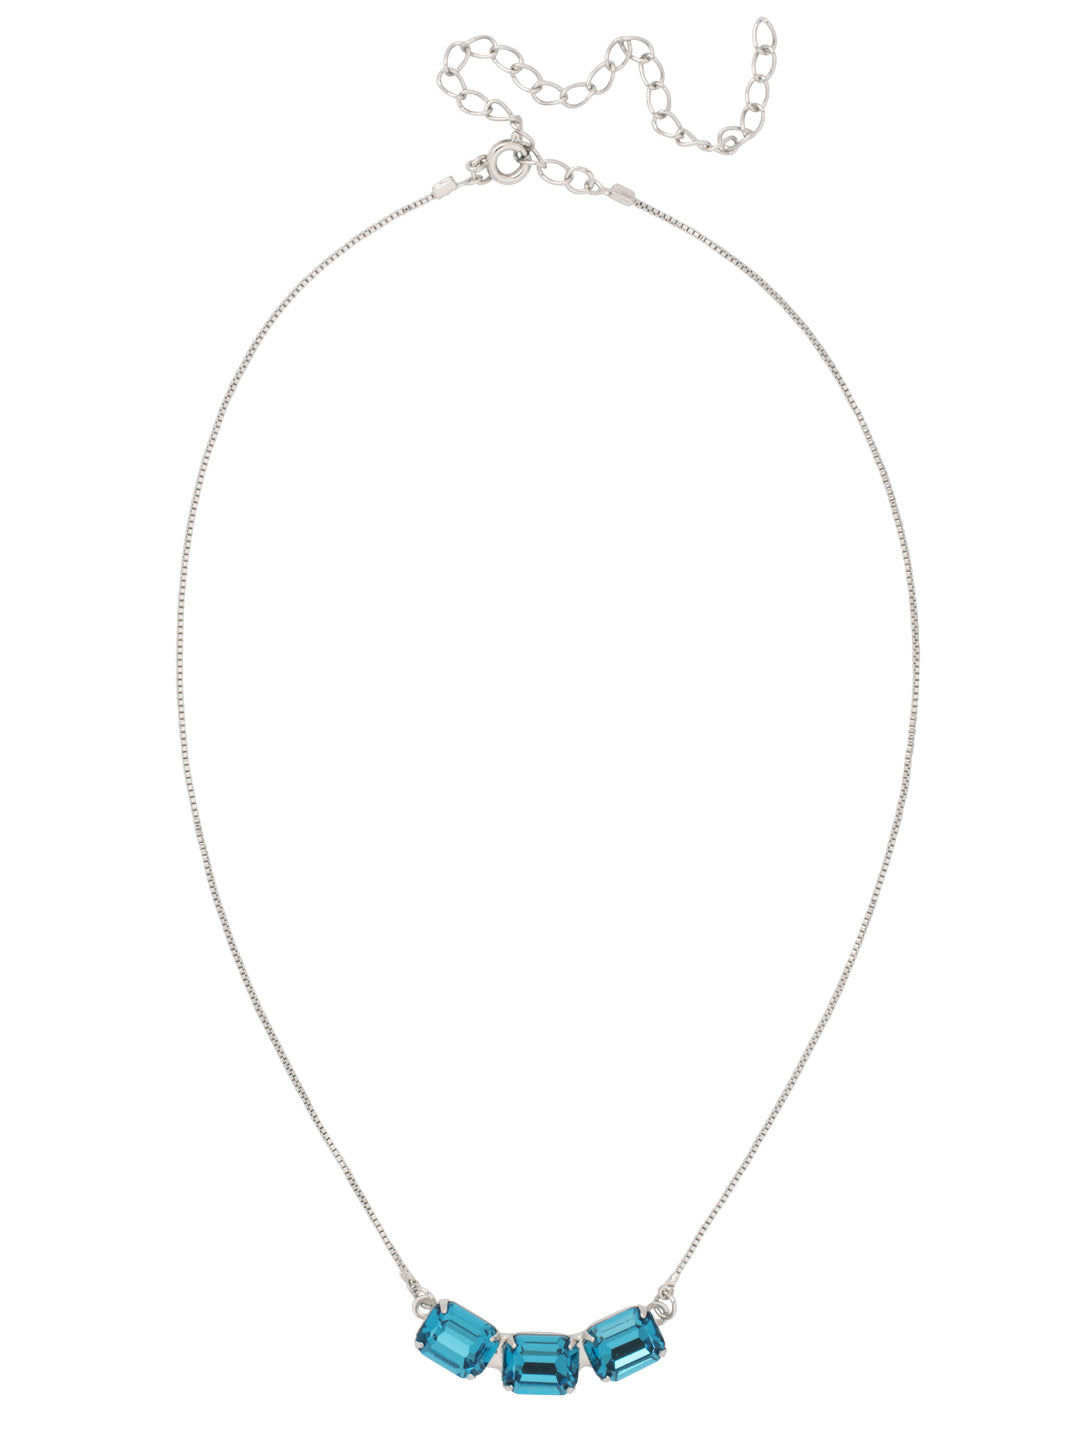 Octavia Triple Tennis Necklace - NFL15PDASP - <p>The Octavia Triple Tennis Necklace features three emerald cut crystals on a dainty adjustable chain, secured by a spring ring clasp. From Sorrelli's Aspen SKY collection in our Palladium finish.</p>